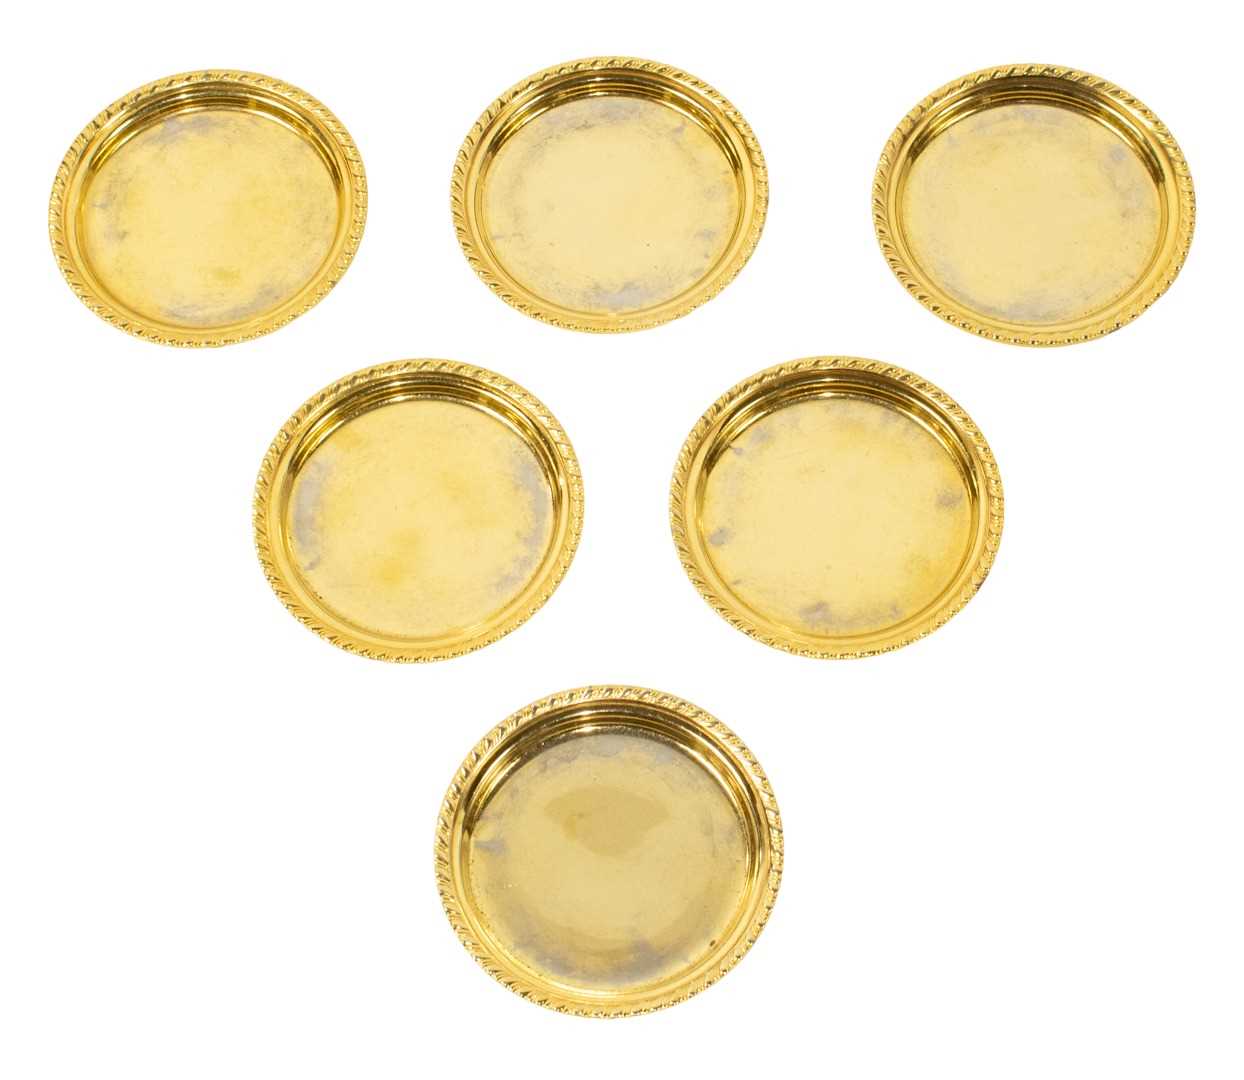 Set of 6 Gilt Plated Nut Dishes